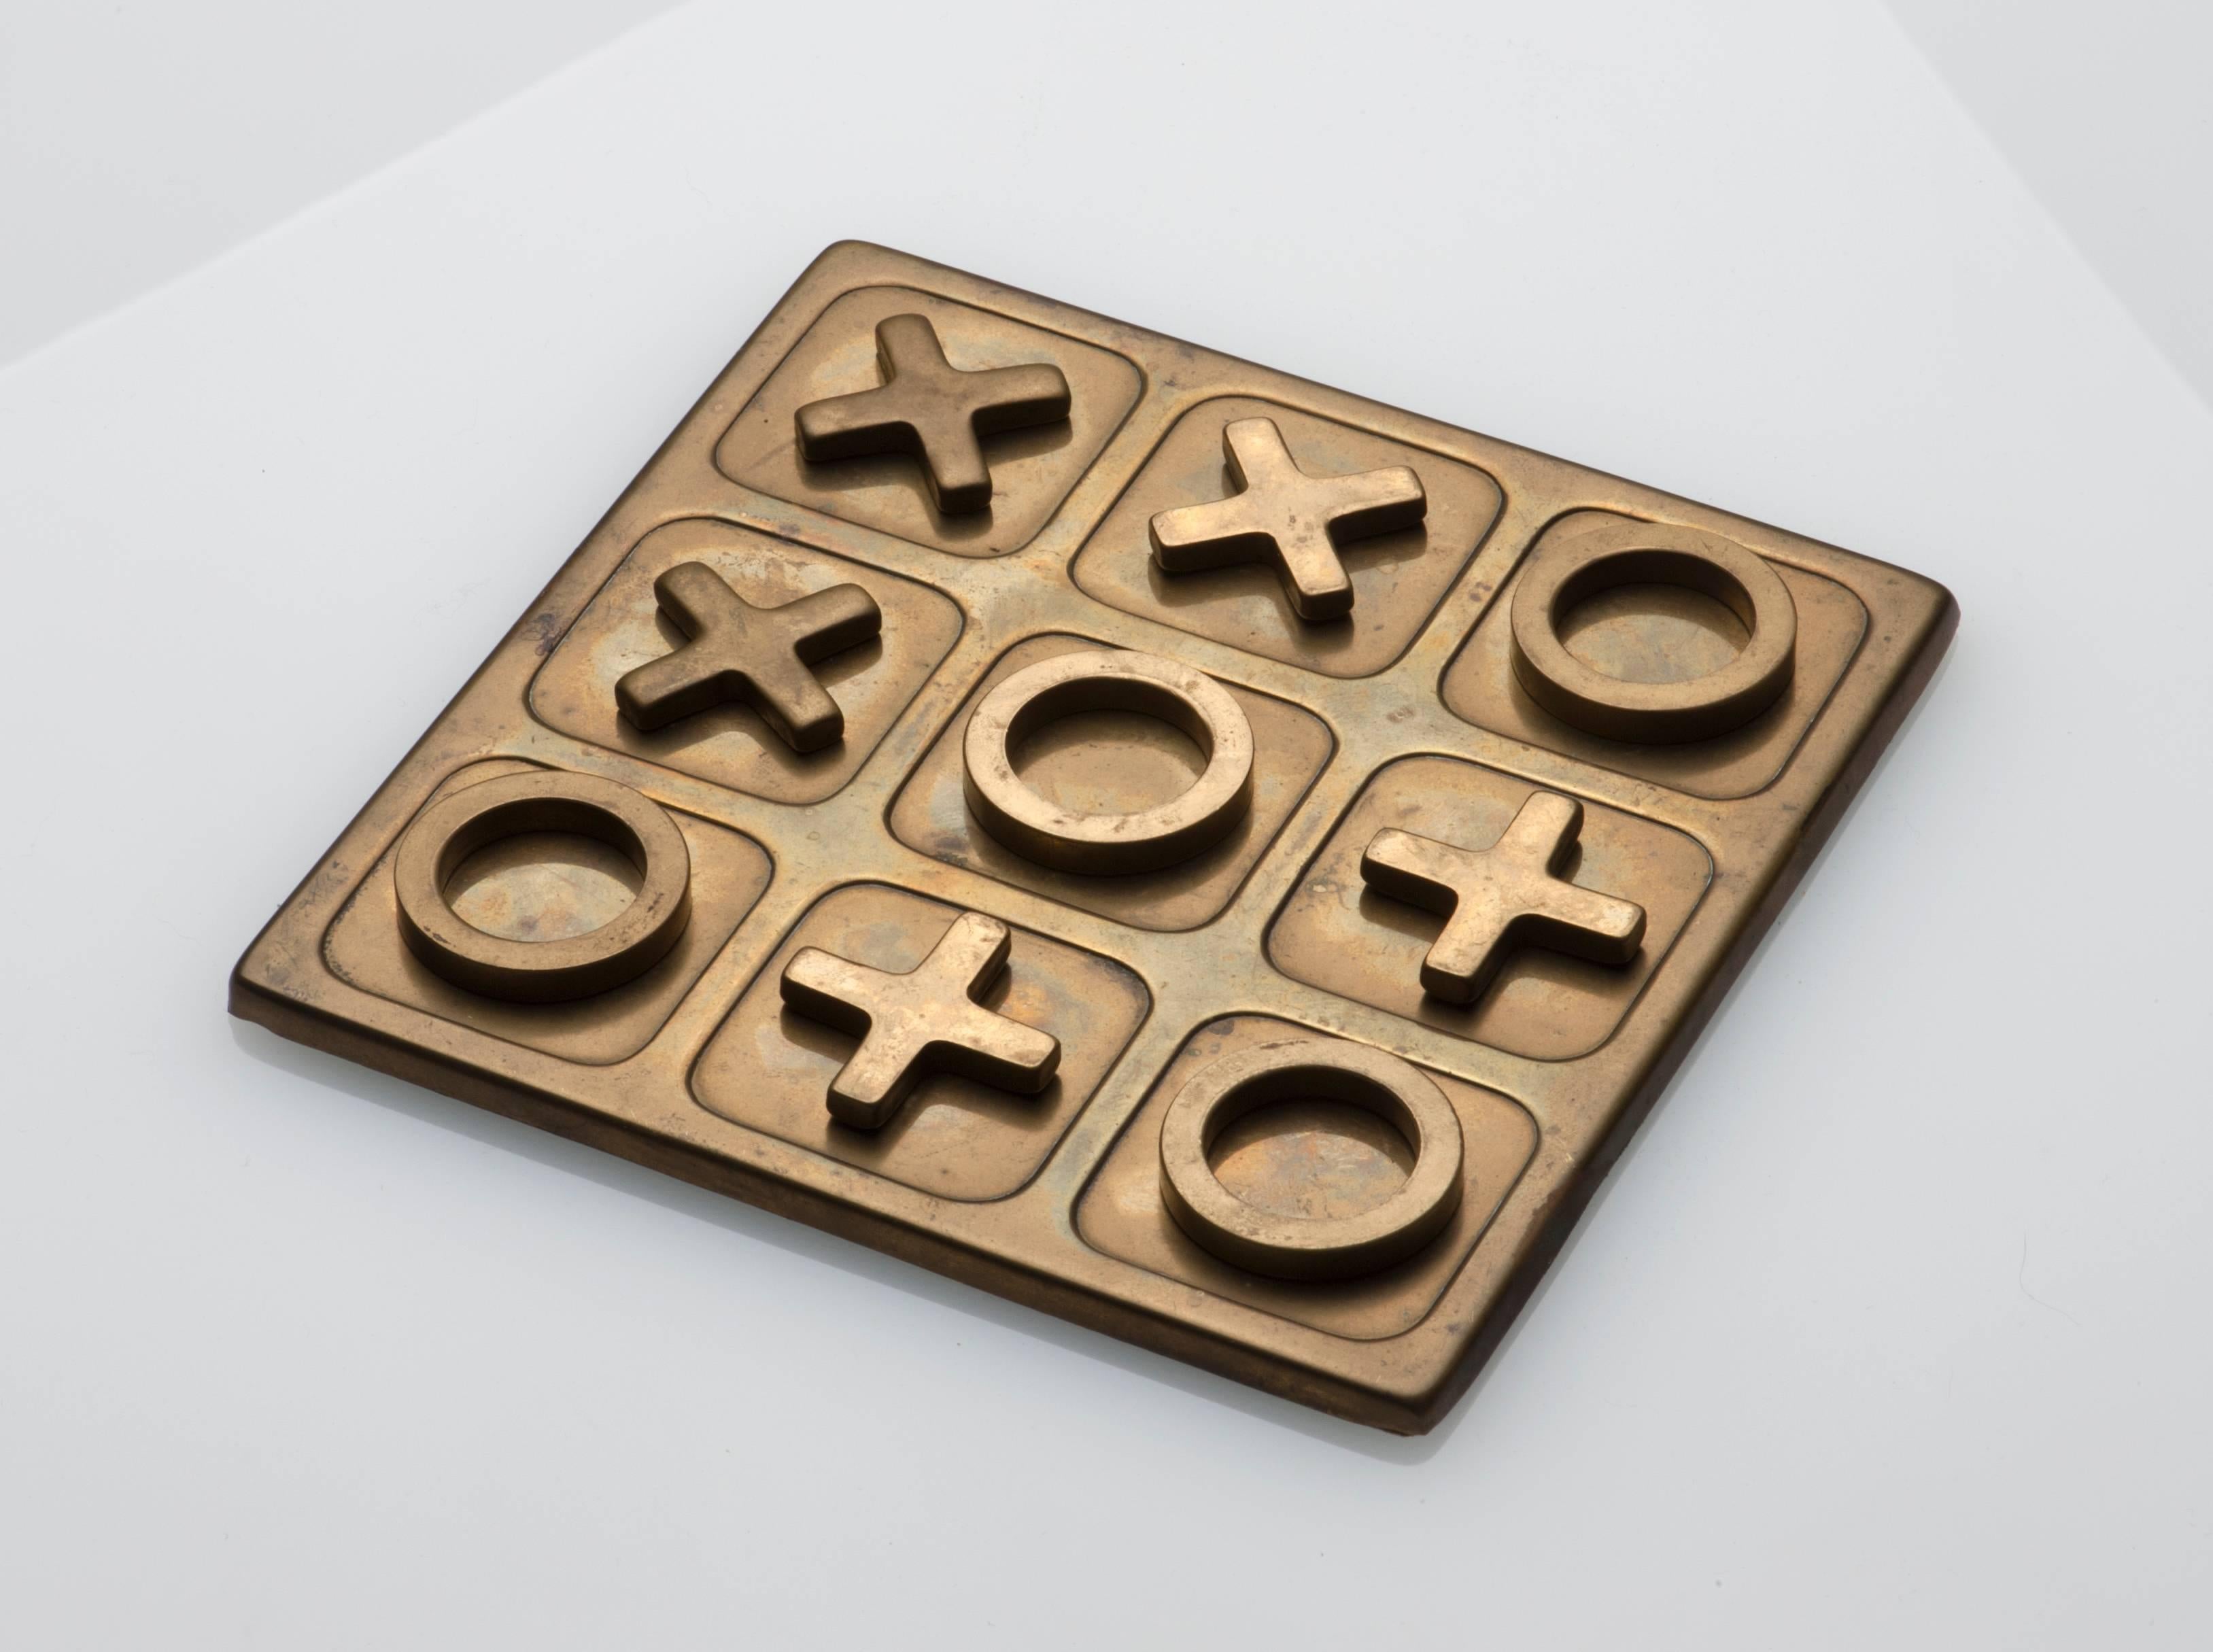 Appealing vintage brass game of Tic Tac Toe. Complete with ten pieces. Green felt to underside.